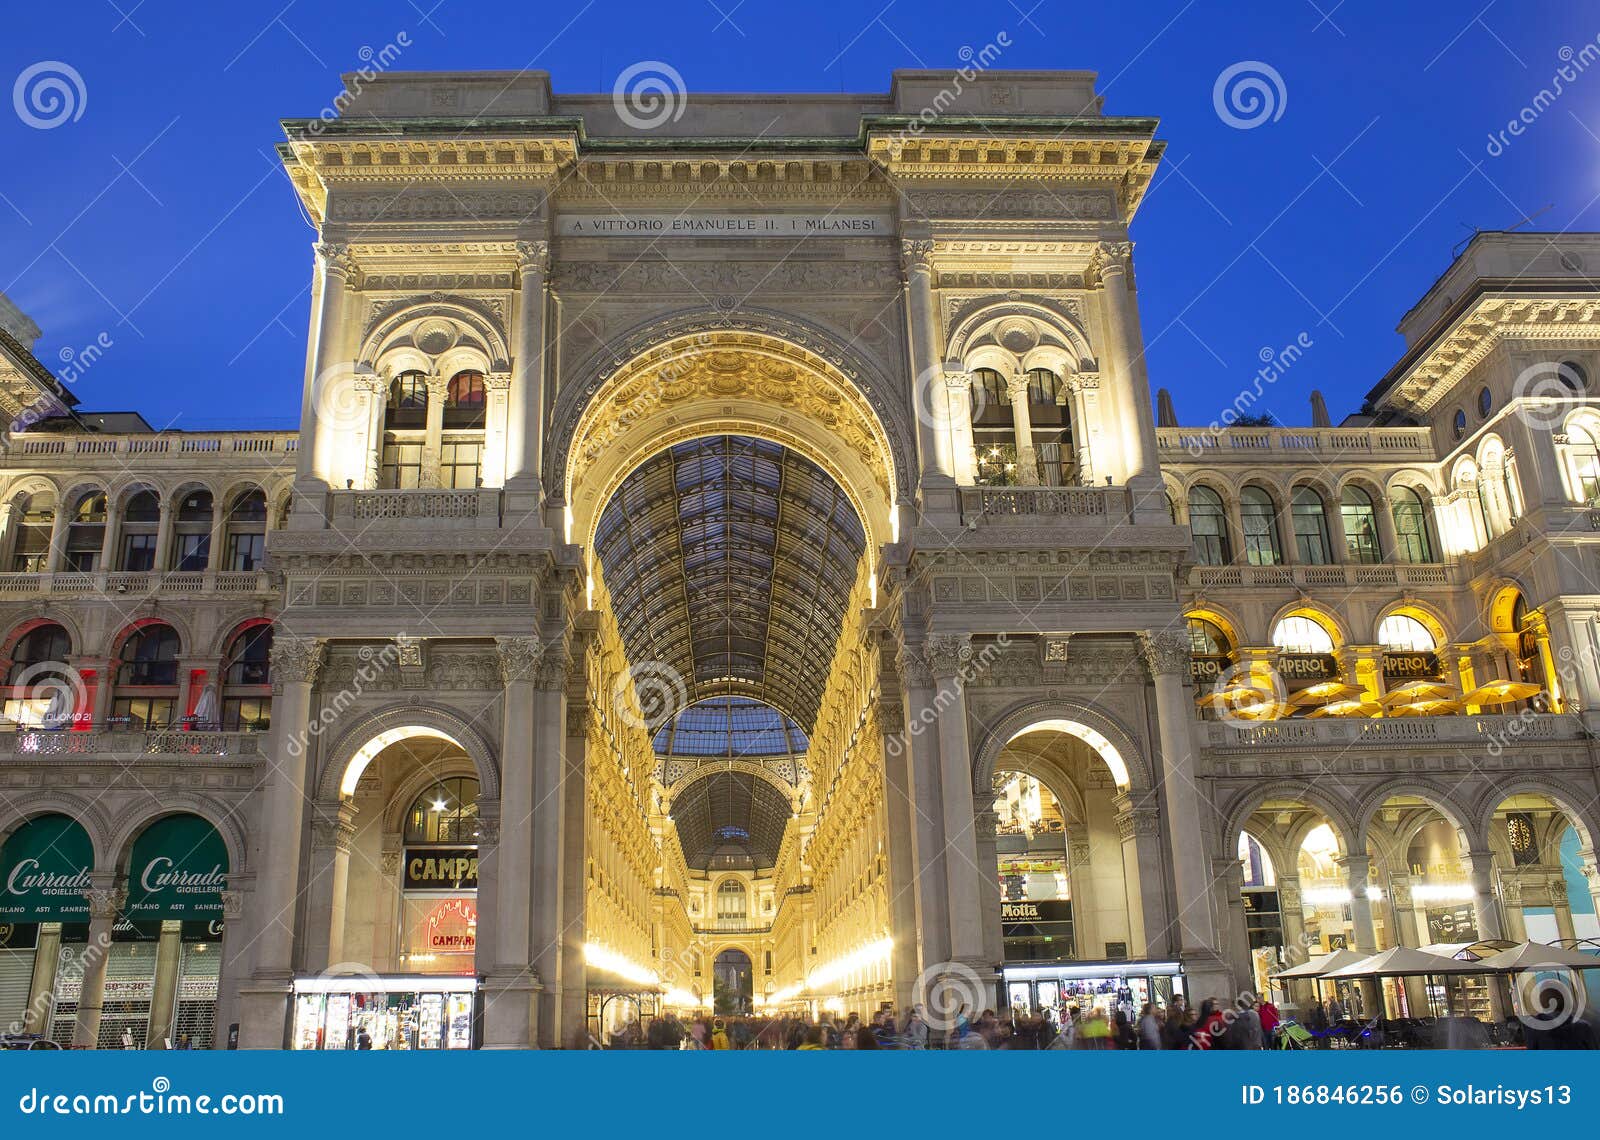 Milan, Italy - May 03, 2017: Glass Dome of Galleria Vittorio Emanuele ...